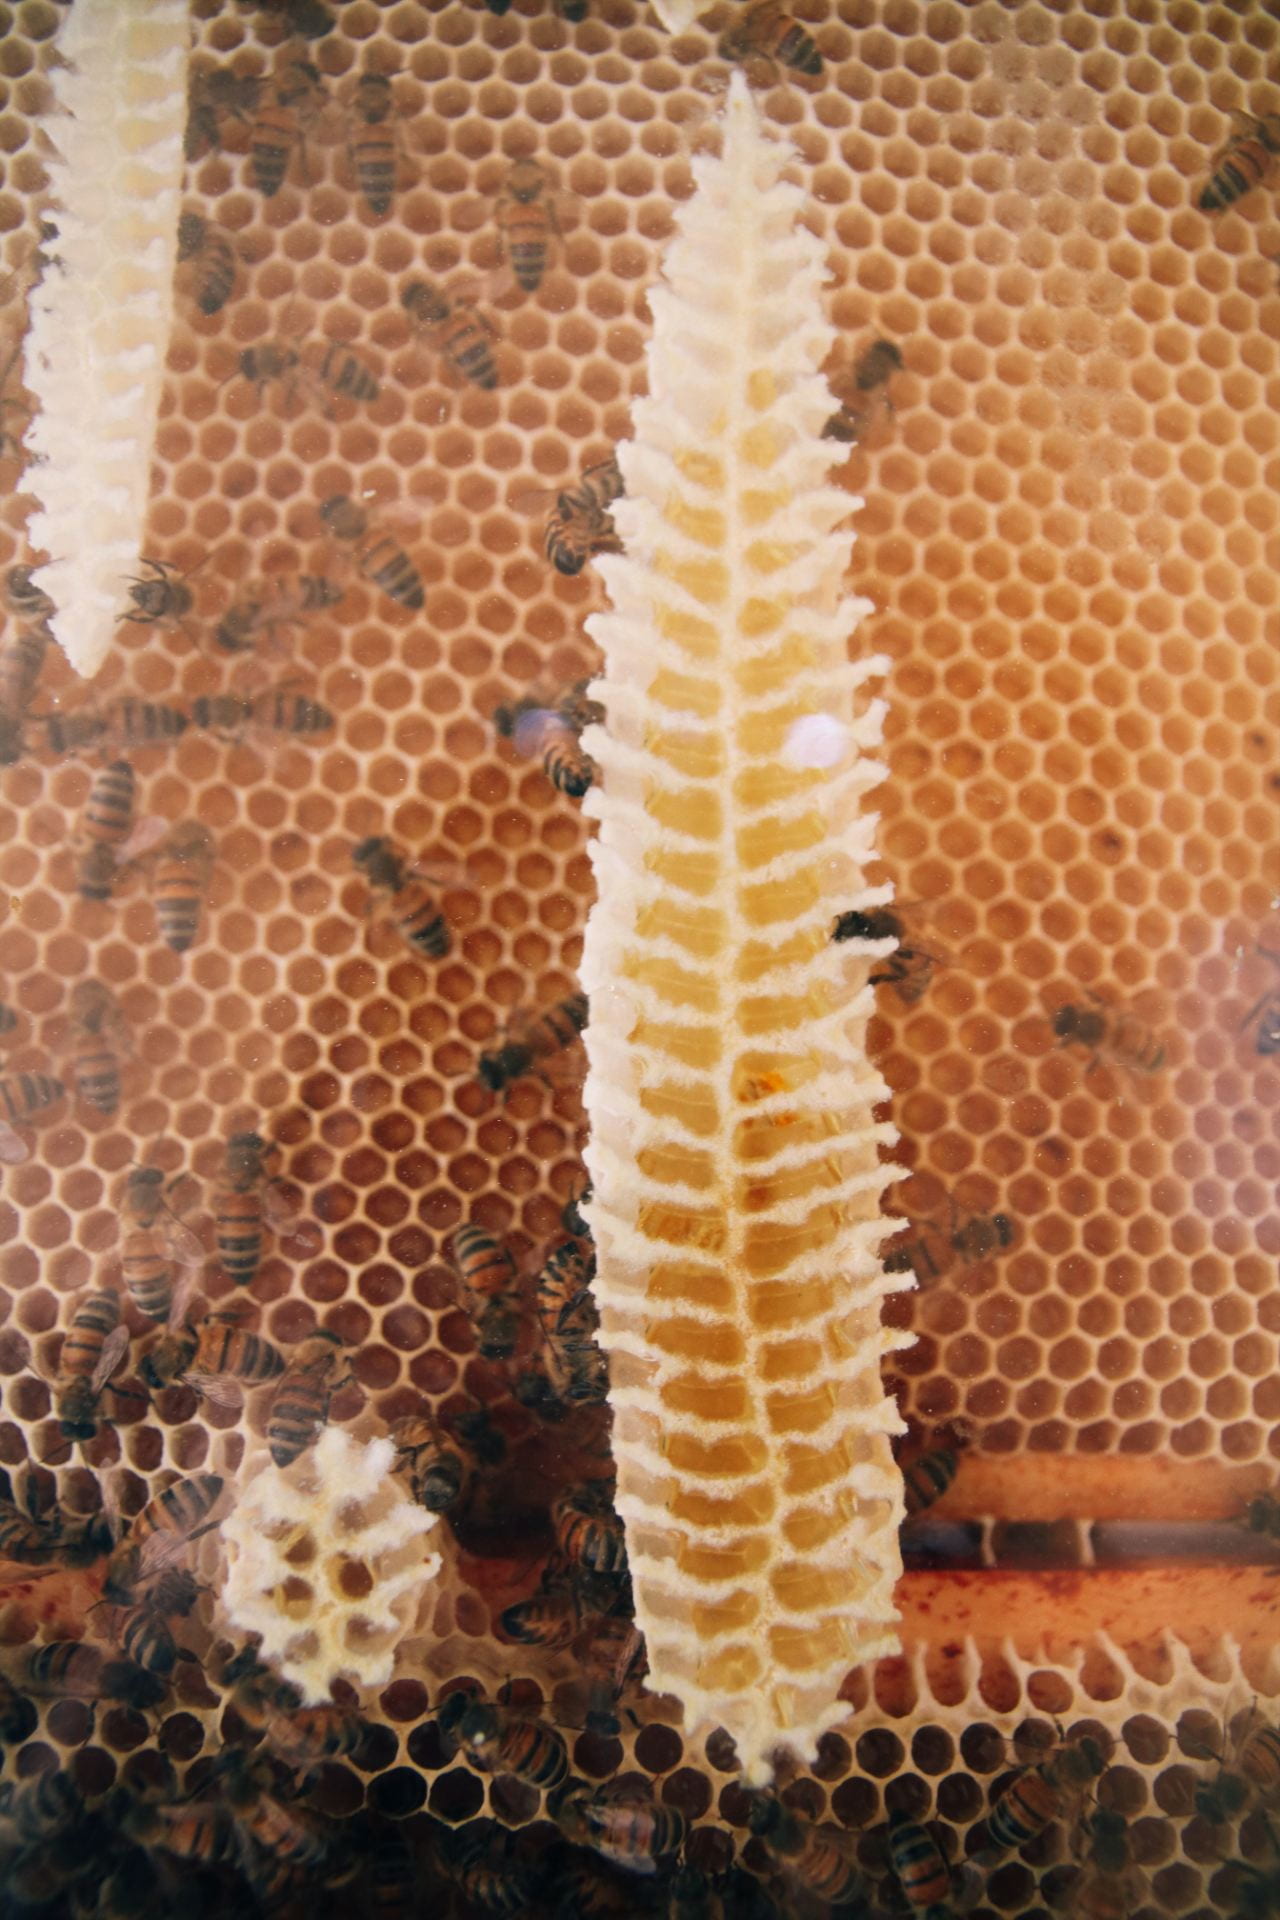 Image of a long strip of honeycomb and bees feeding into it behind glass.